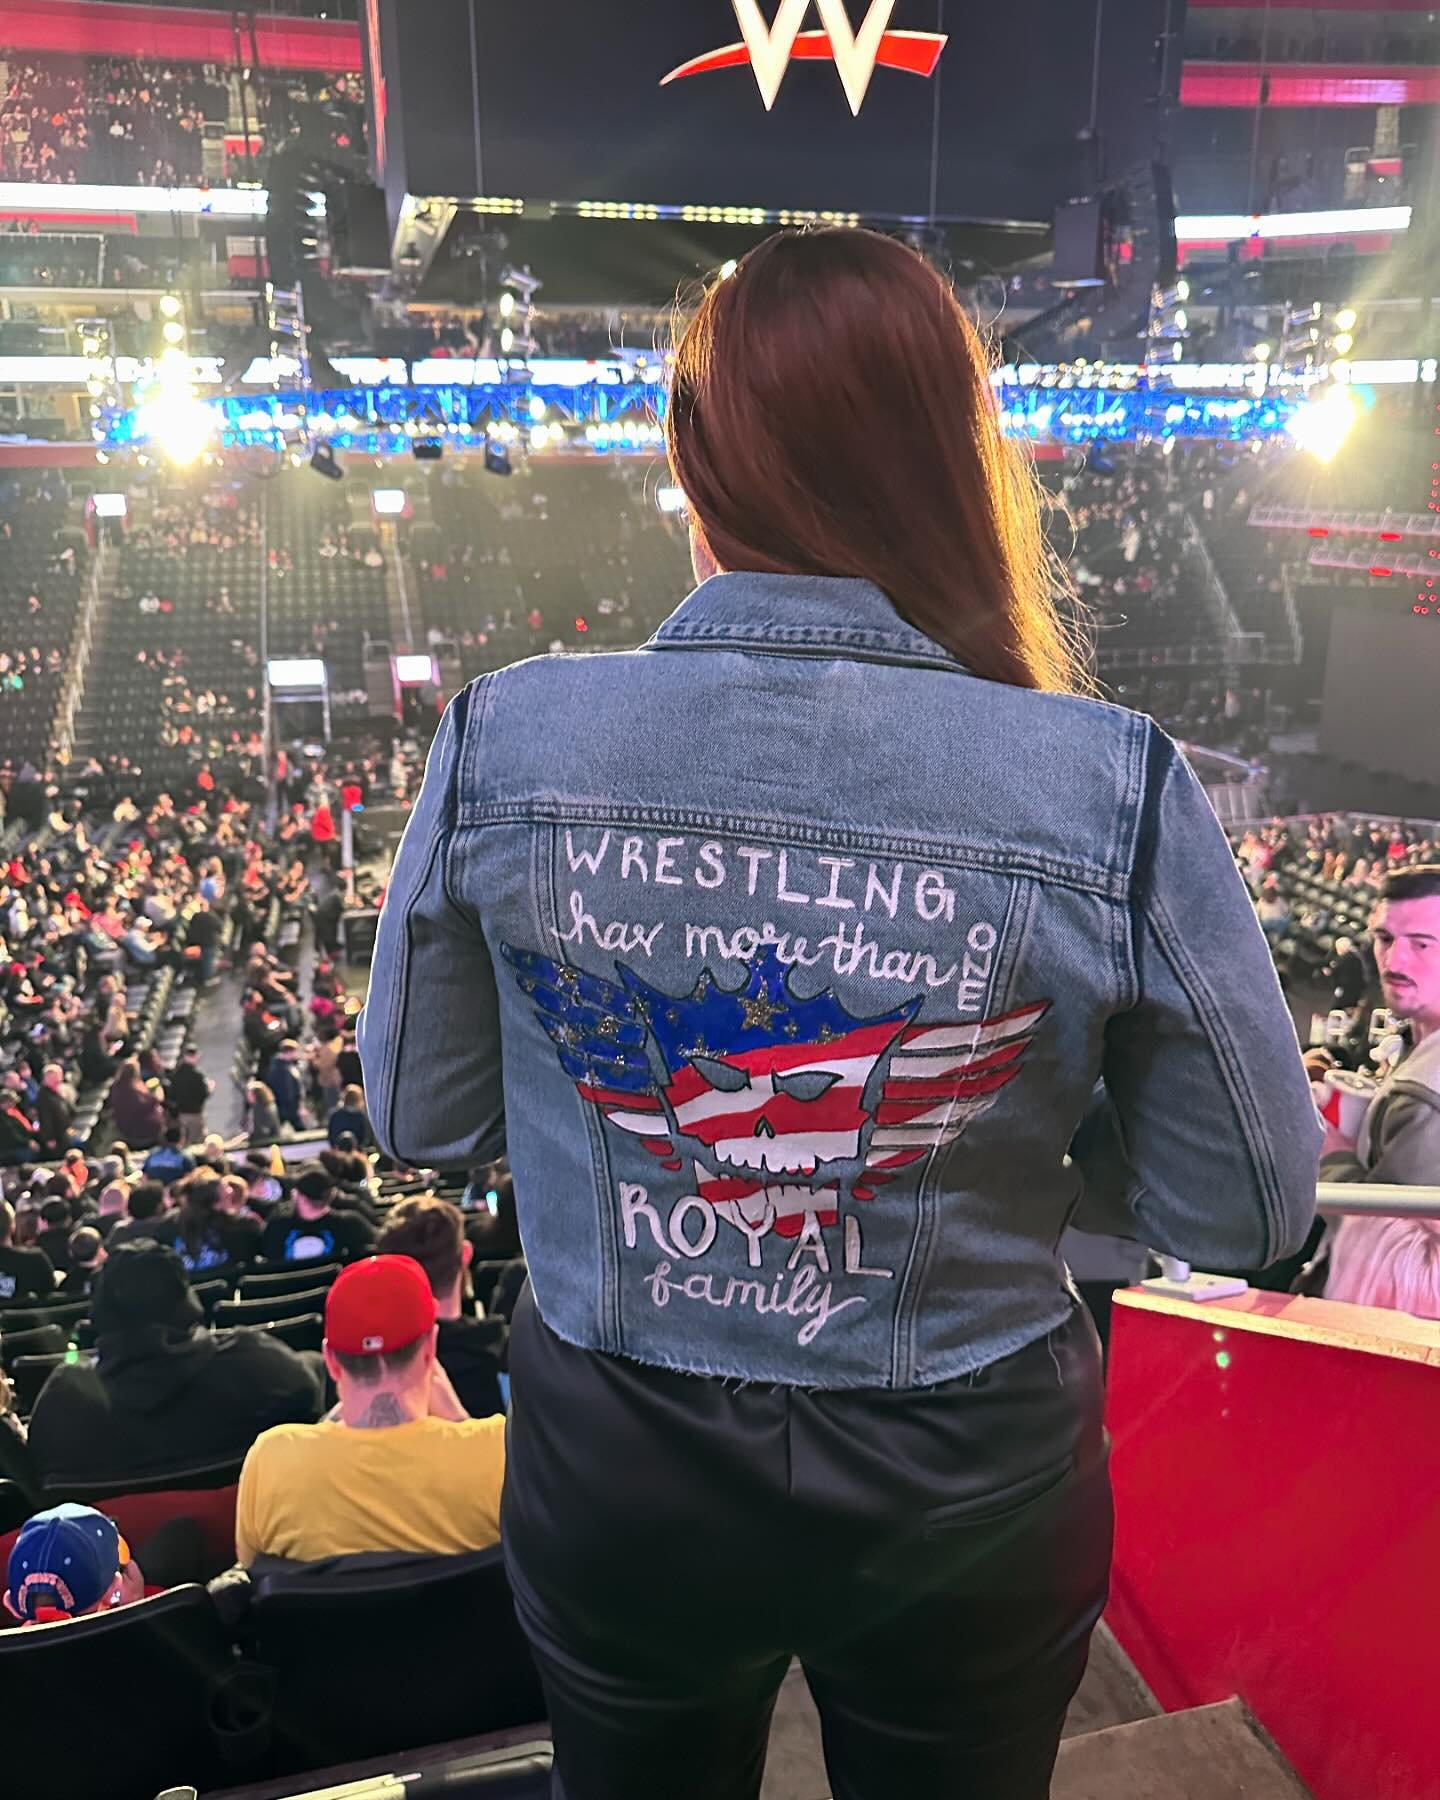 In my darkest hour, I found pro wrestling and it saved me

A little dramatic? Maybe, but here&rsquo;s the thing

I got laid off during SummerSlam weekend in Detroit. I spent my last day of work meeting wrestlers and sending Mike a million photos and 